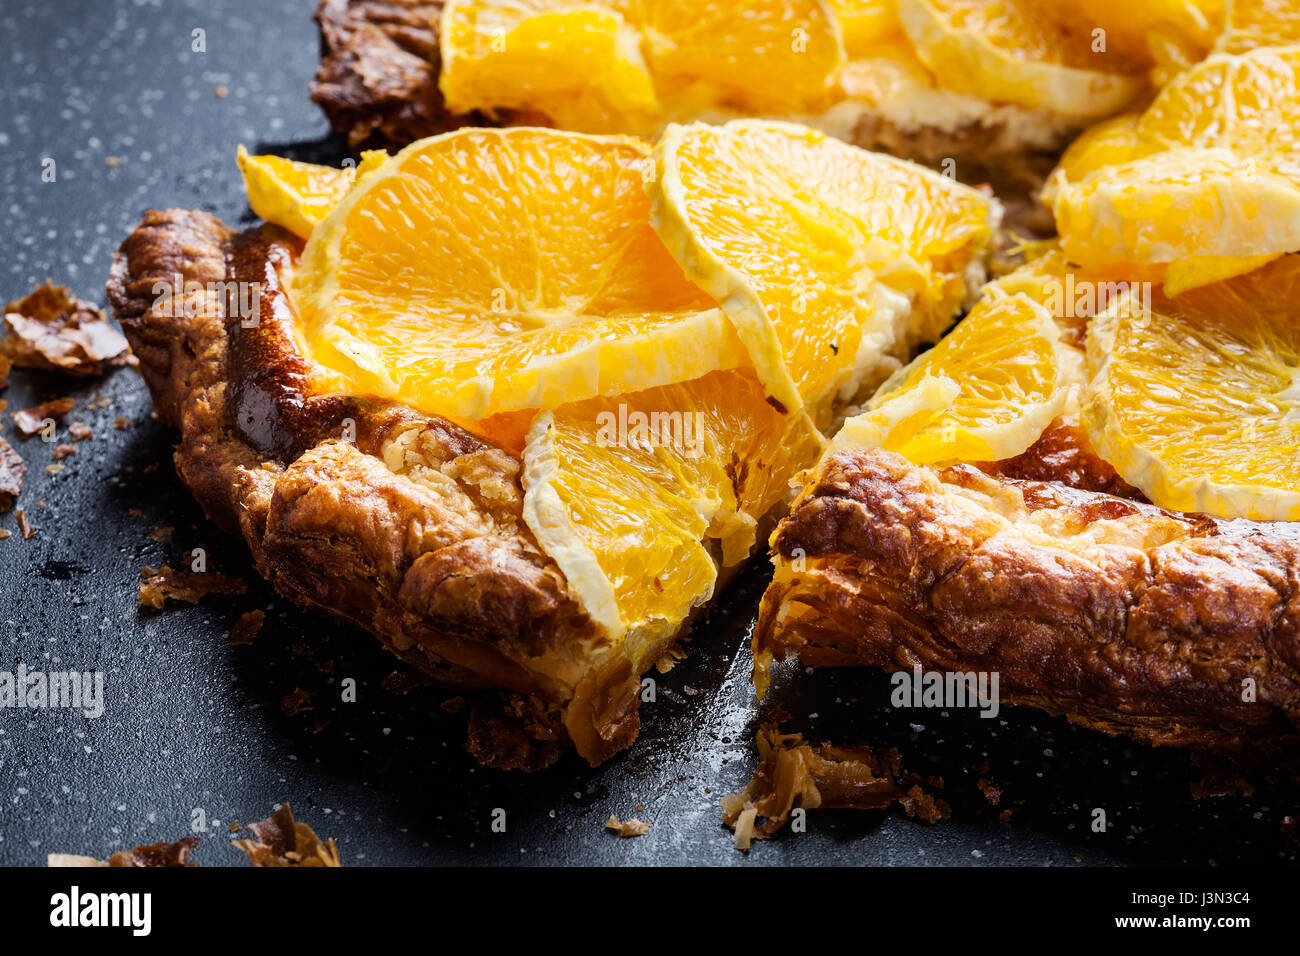 Slice of tart with cottage cheese and sliced orange Stock Photo